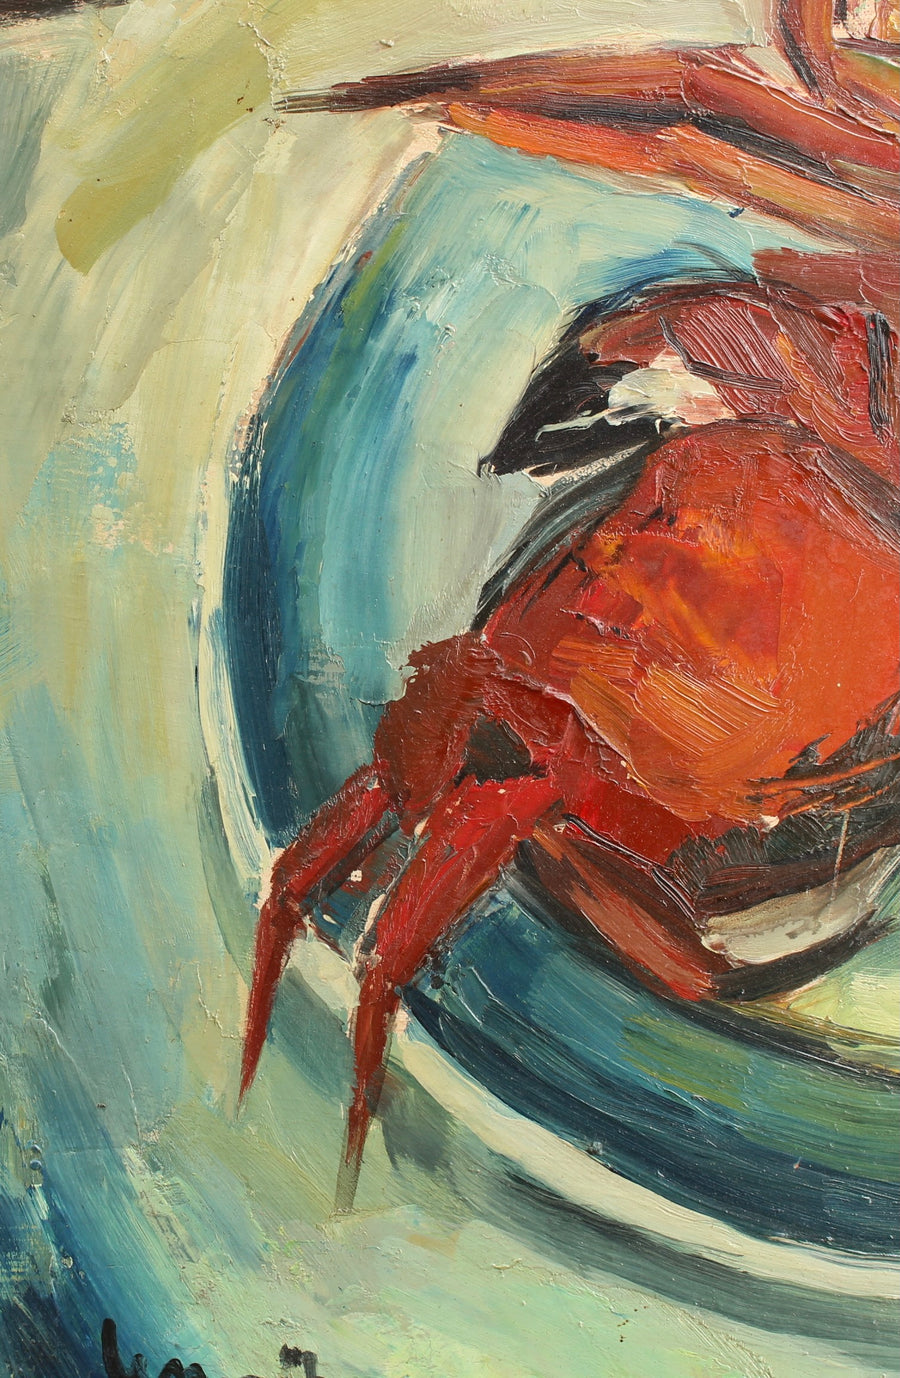 'Still Life with Crab' by André LeMaitre (1951)